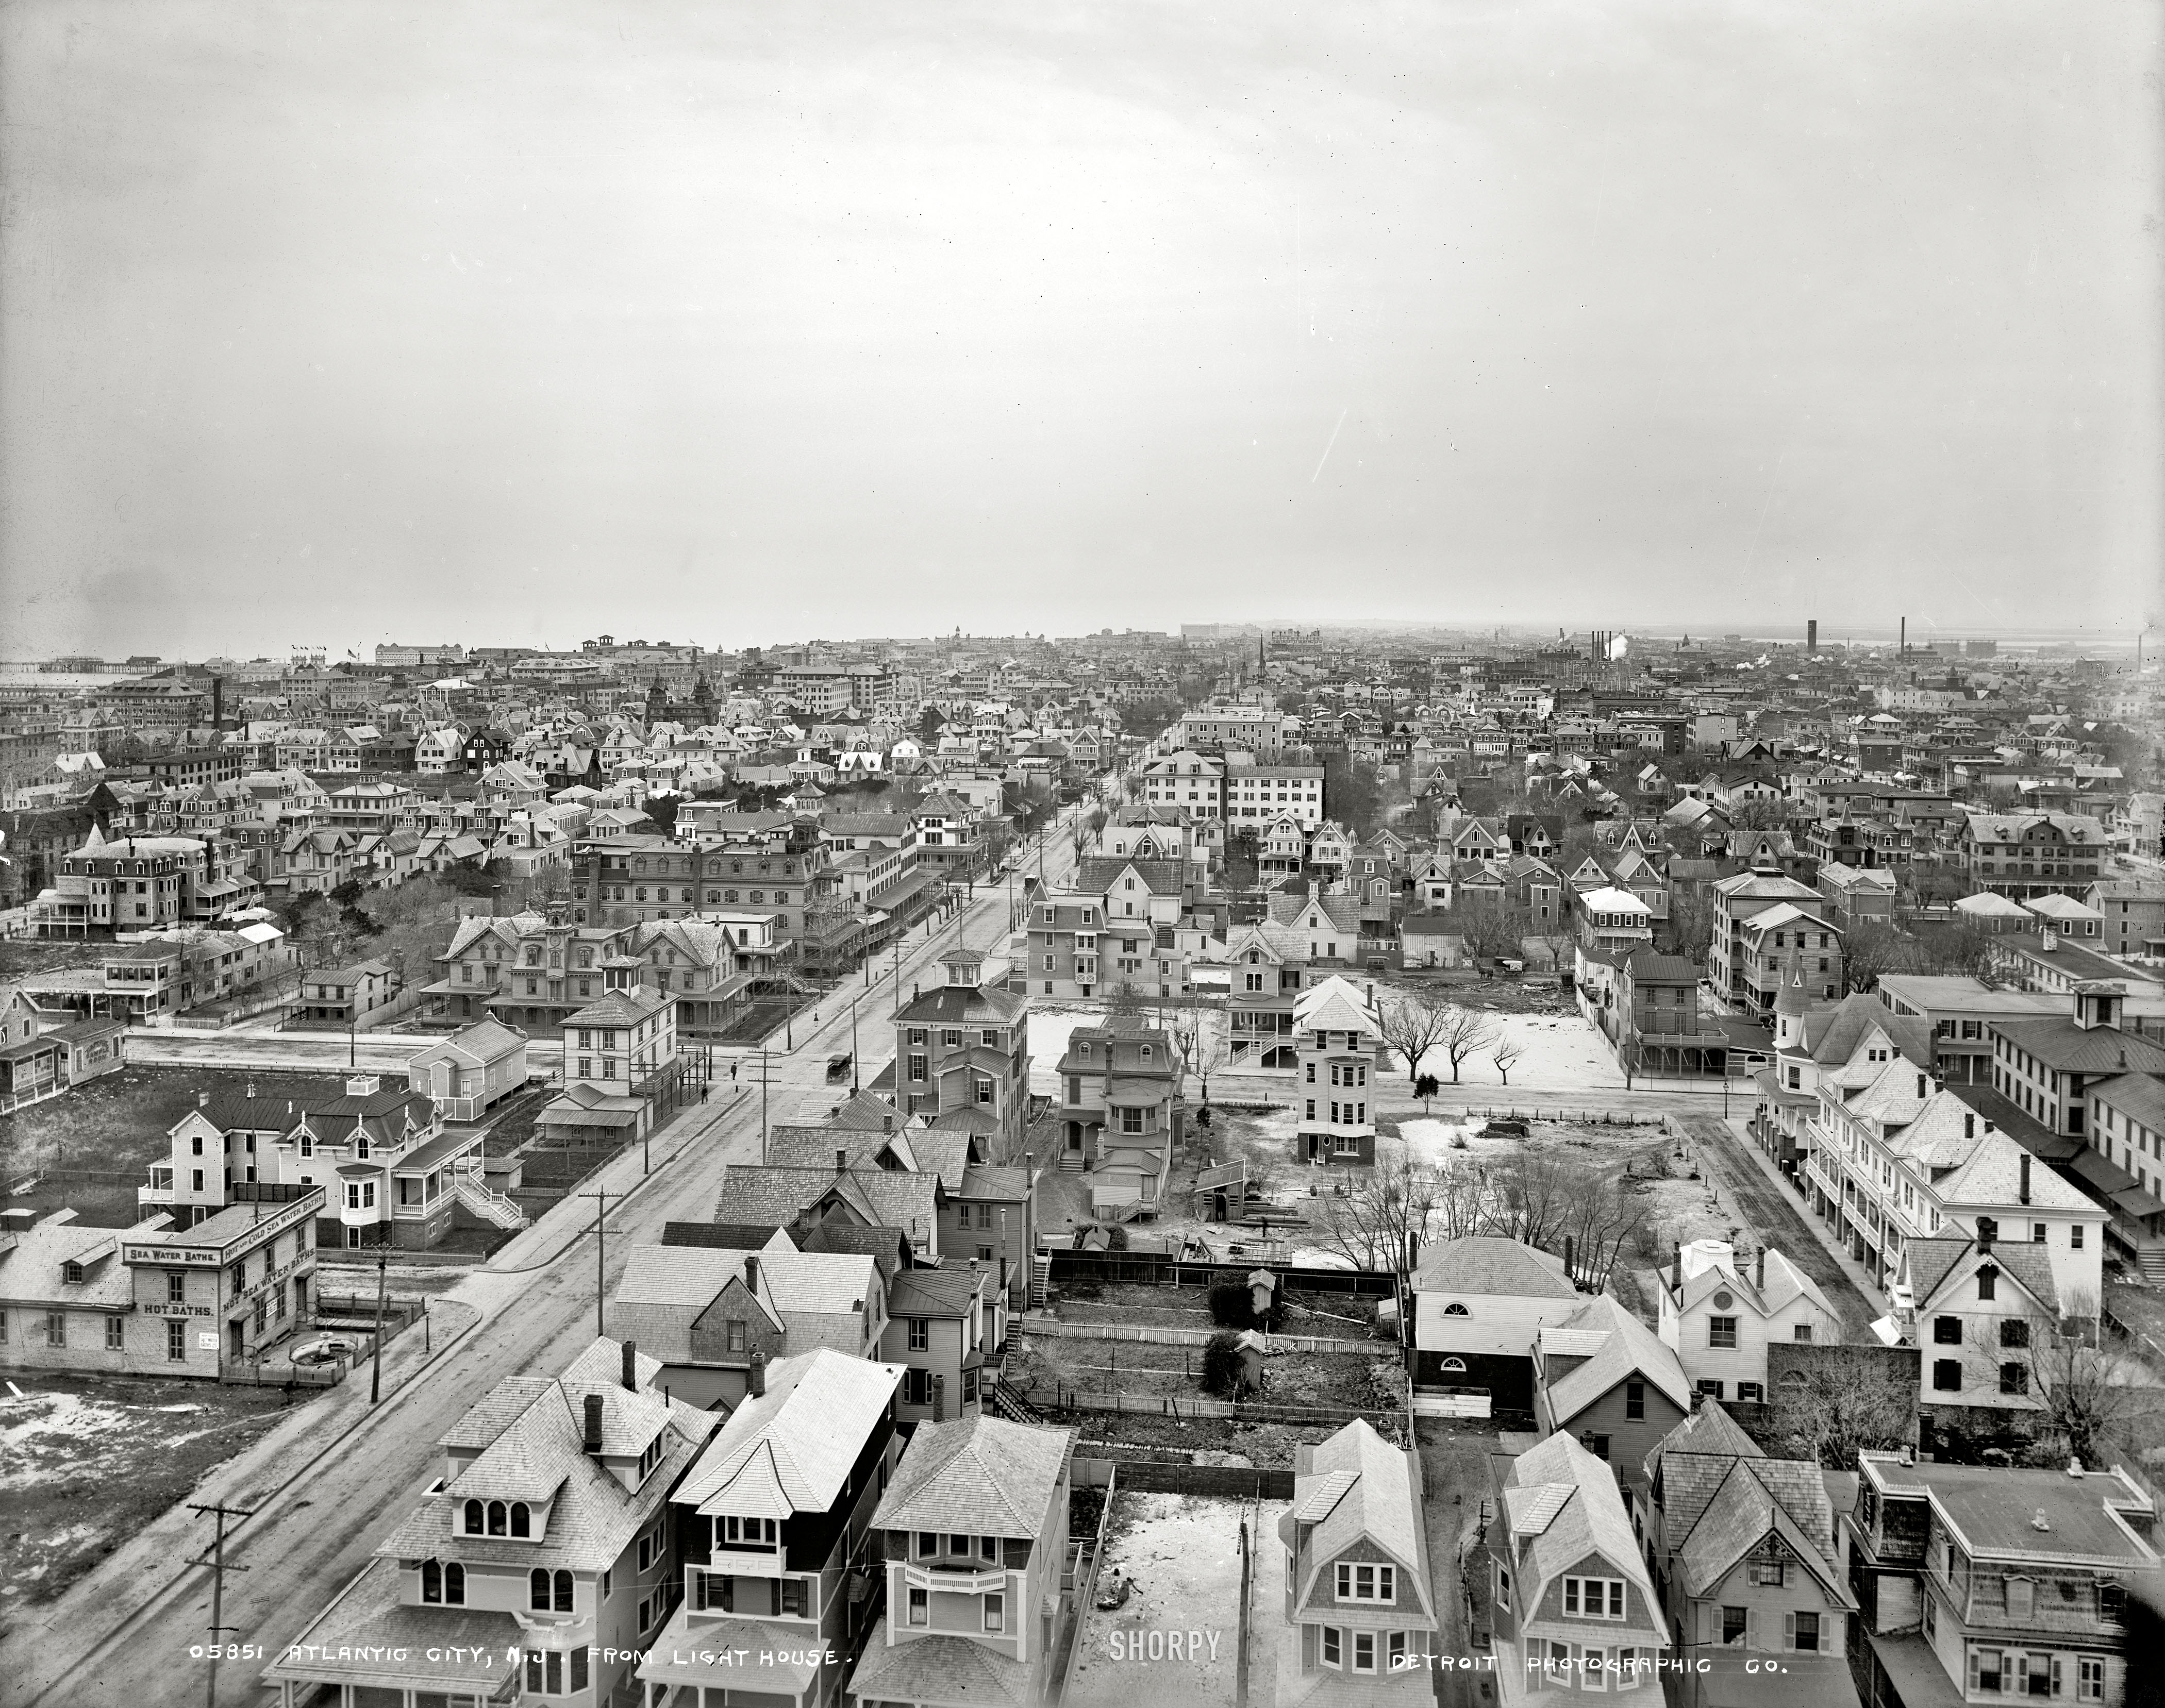 New Jersey circa 1900. "Atlantic City from lighthouse." To be continued! Detroit Publishing Company glass negative. View full size.